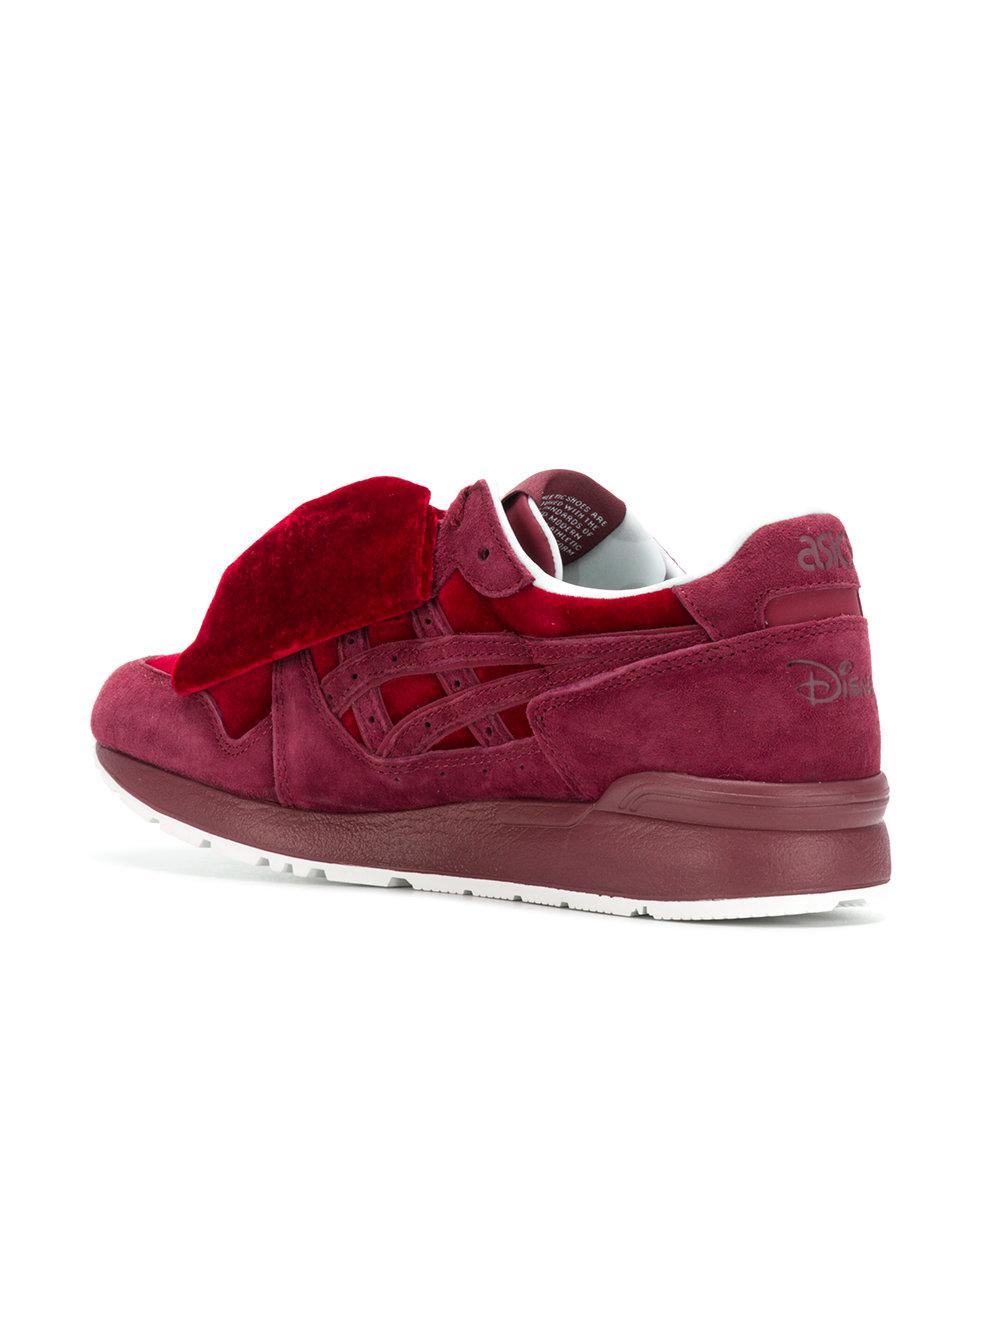 Asics Leather Gel-lyte Disney "snow White And The Seven Dwarfs" Trainers in  Pink & Purple (Red) - Lyst